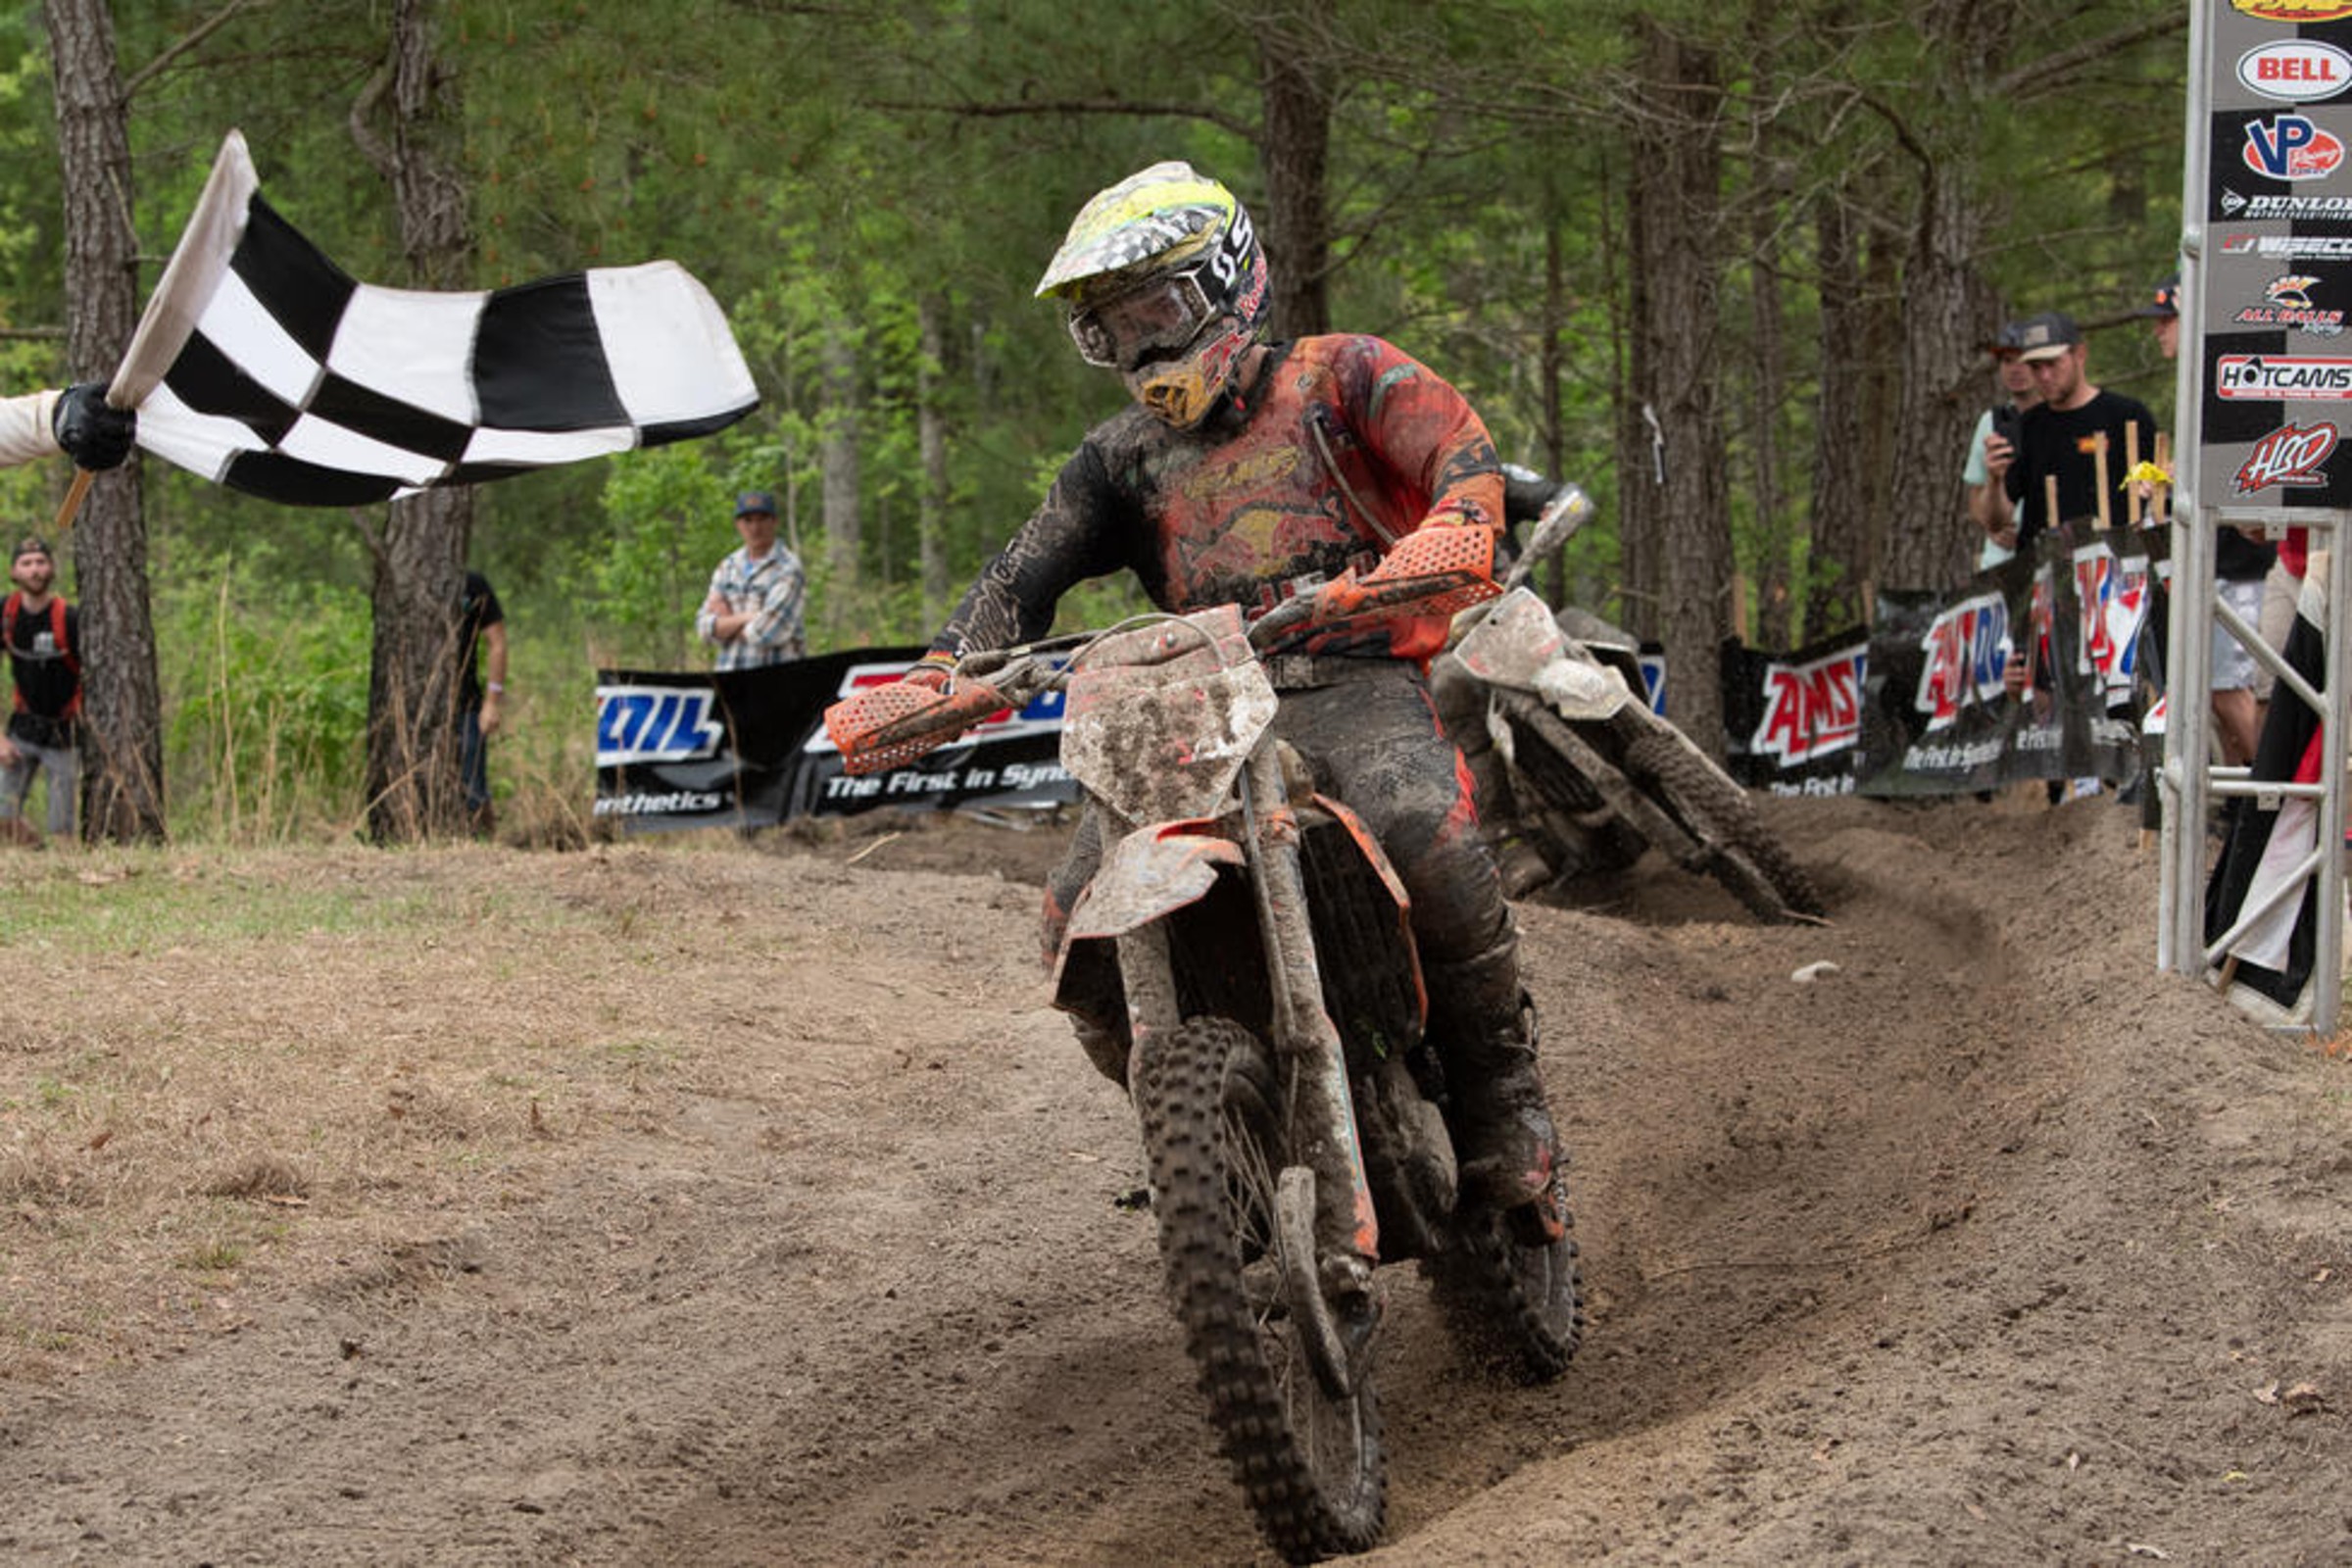 GNCC Racing Heads to Peru, Indiana for XFactor Whitetails GNCC Racer X